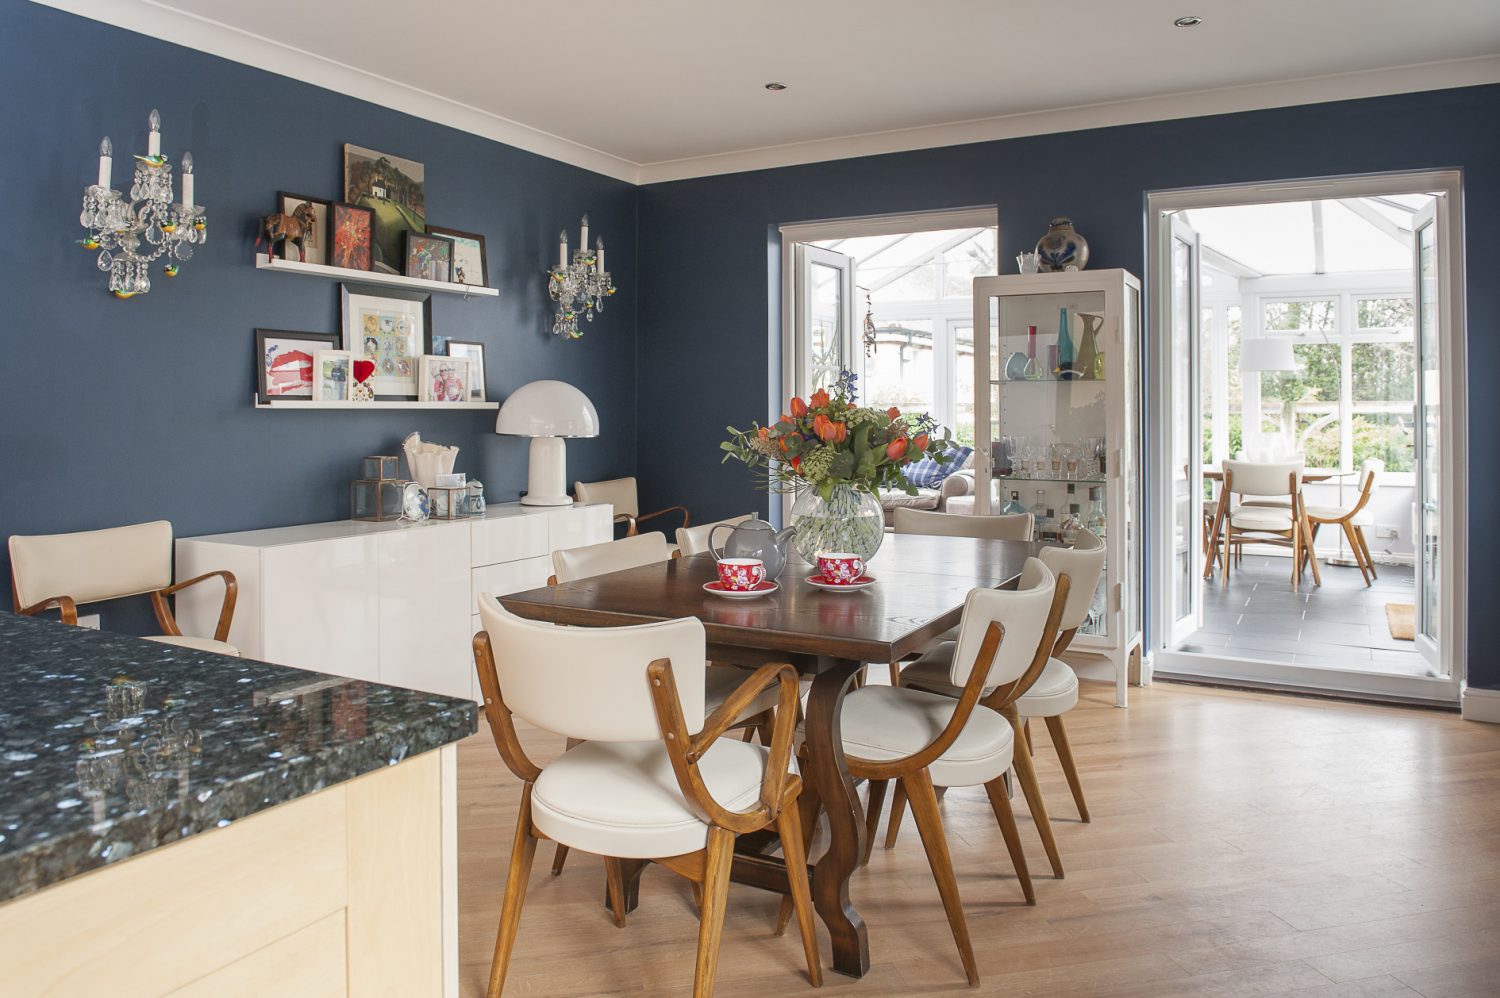 The open plan kitchen and dining room is painted a rich, deep blue